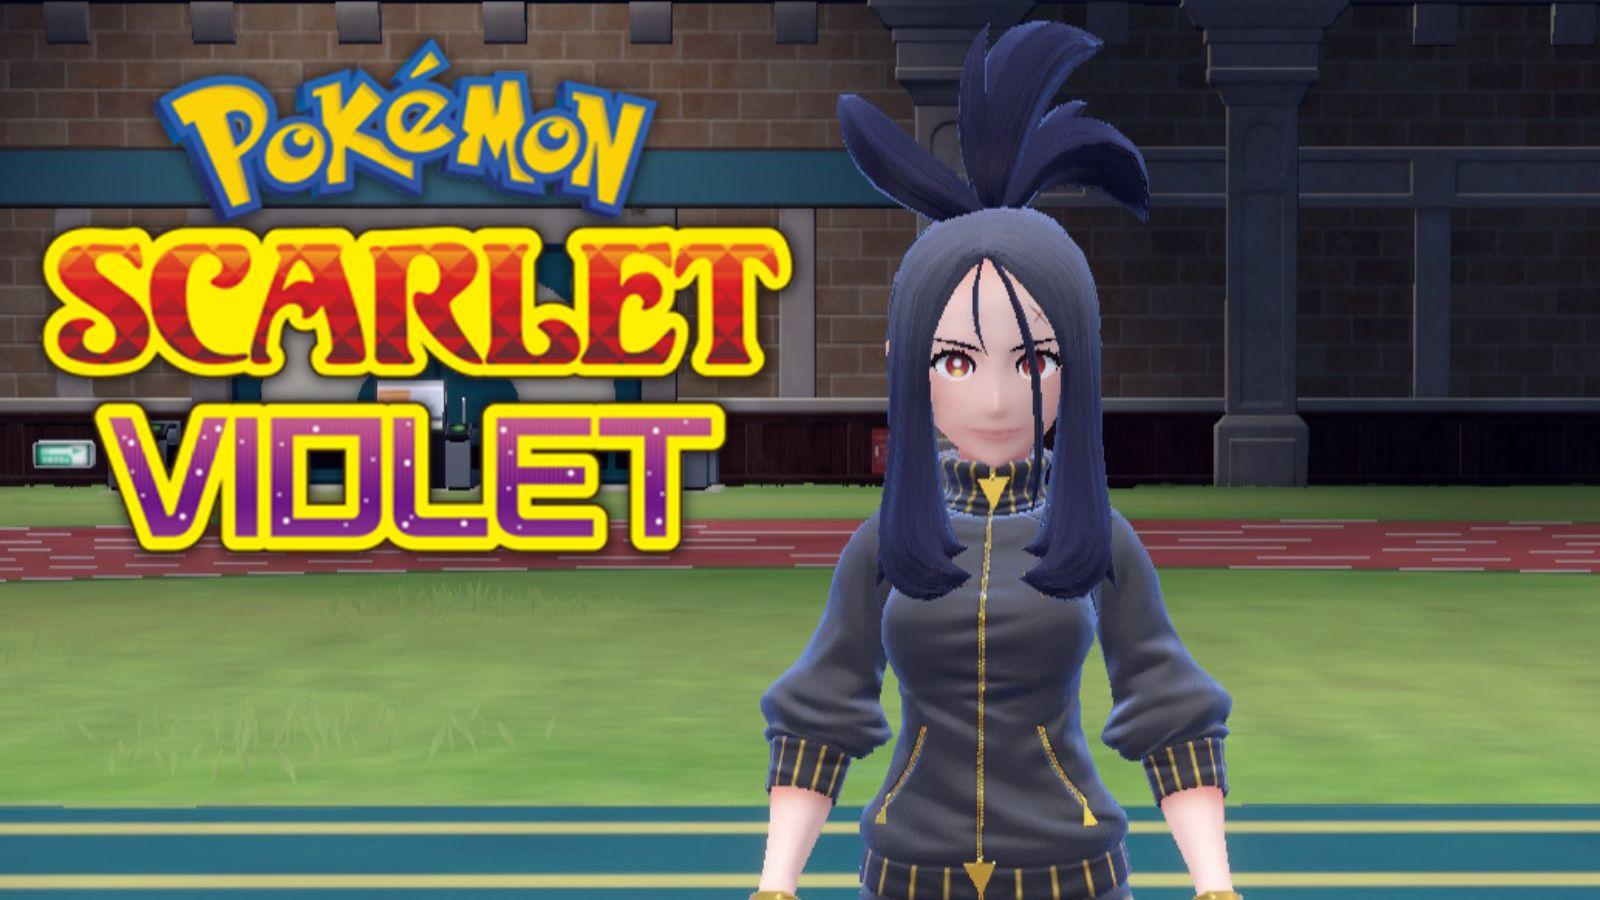  A screenshot of the character Atticus from the video game Pokemon Scarlet and Violet.